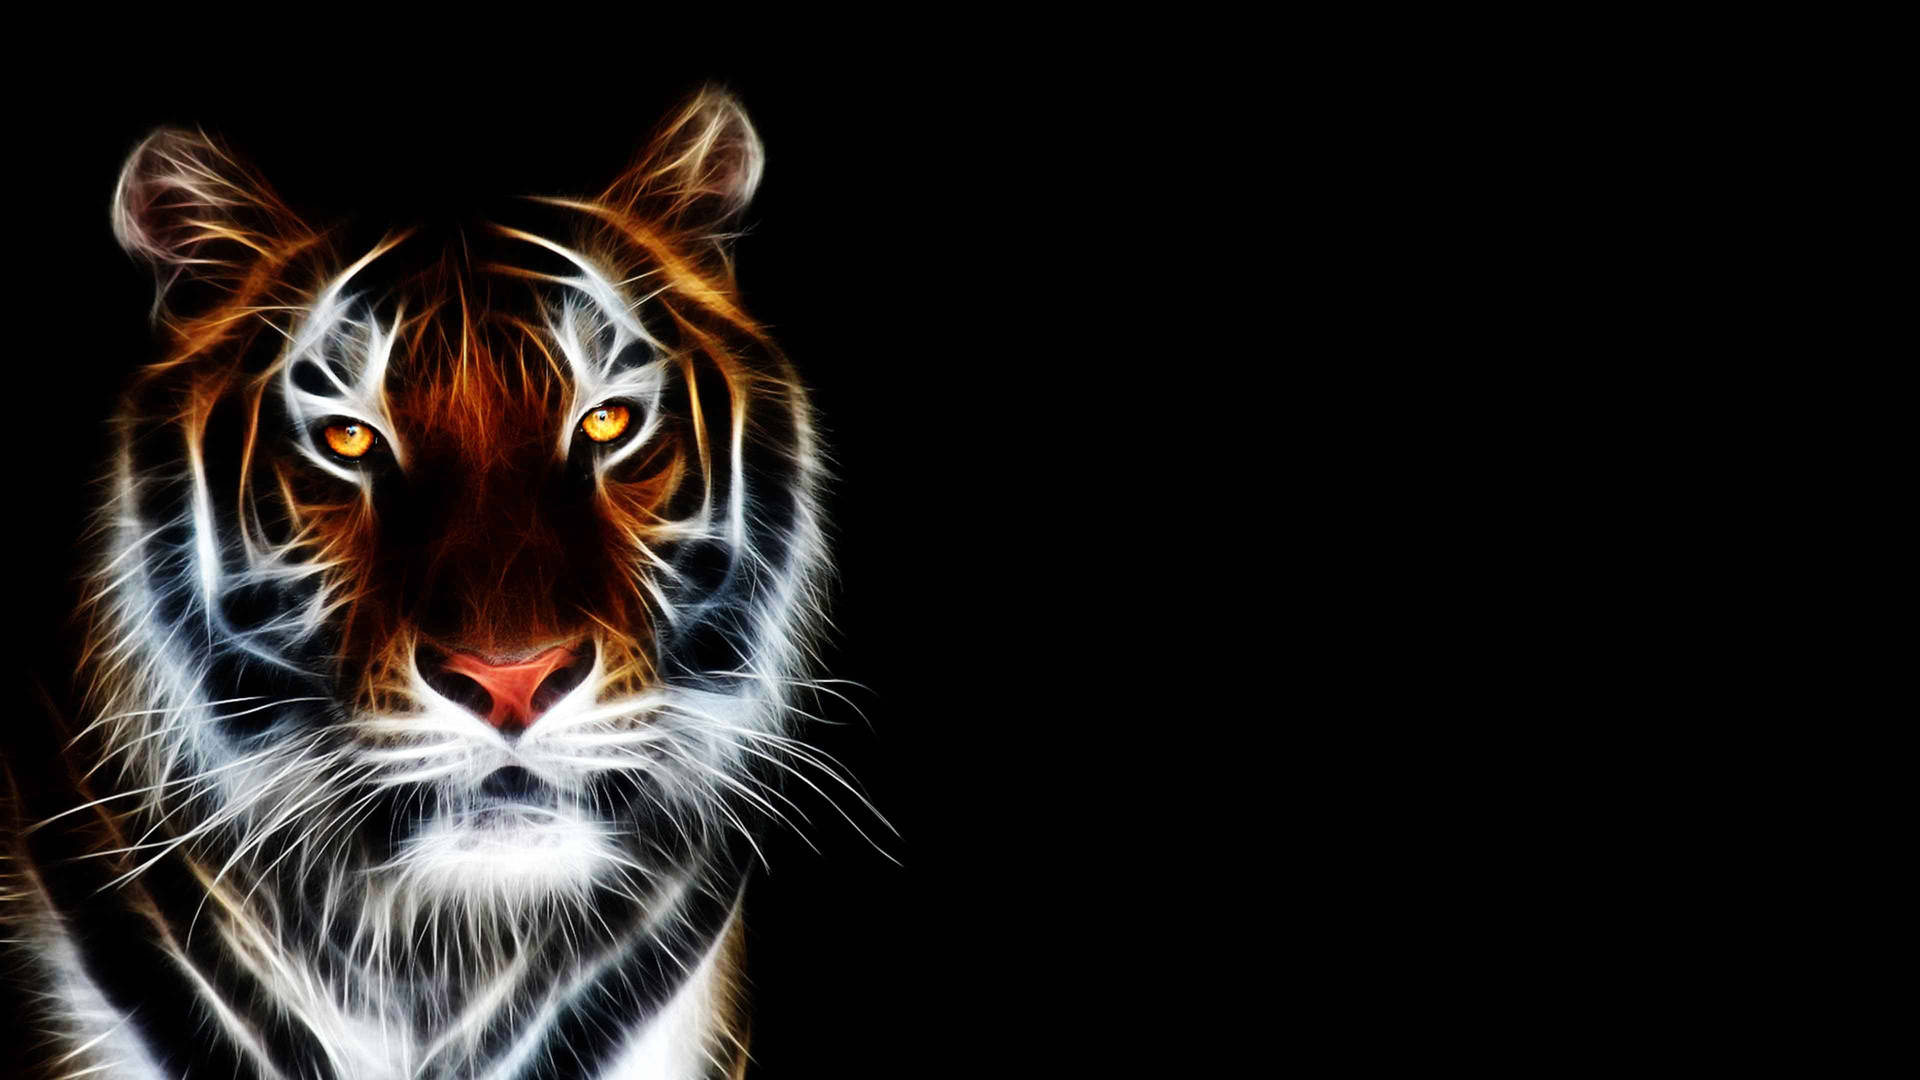 3d Animated Tiger Background